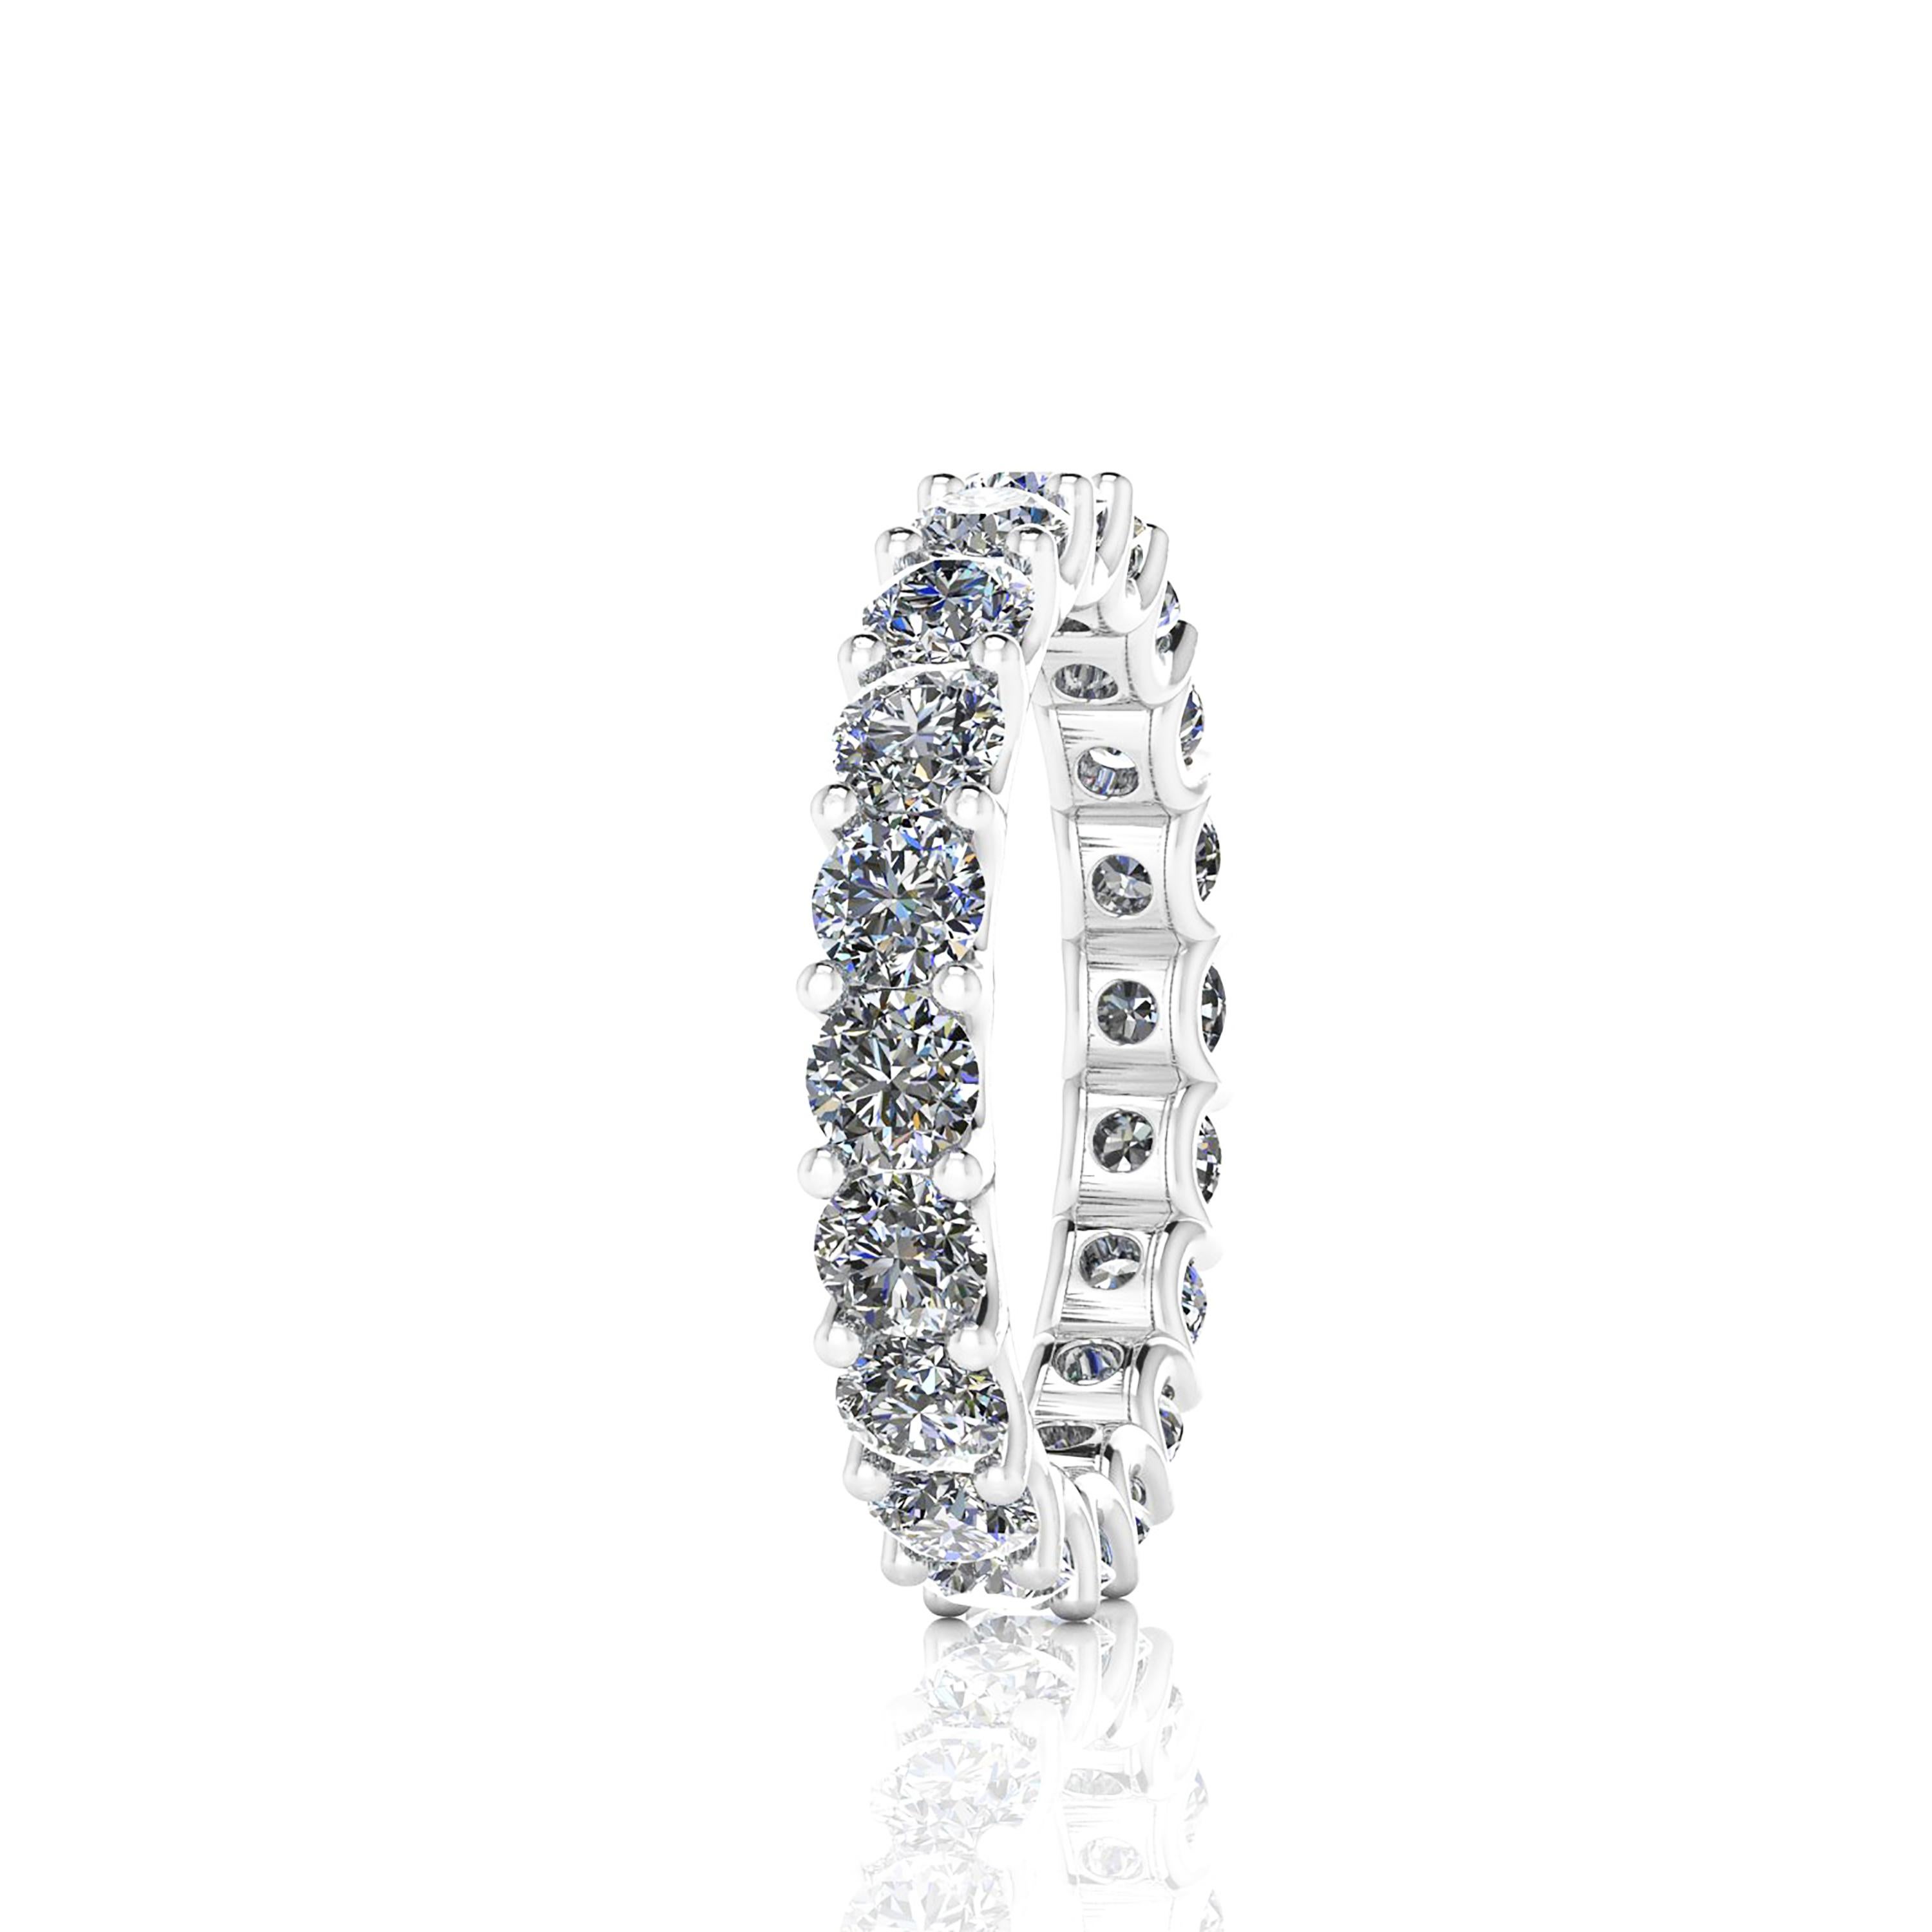 A classic FERRUCCI 2.40 carat of bright white diamonds G color, VS clarity, round brilliant shape cuts, set to perfection in a hand crafted, Platinum 950 eternity band, with stackable possibility, made in New York with the best Italian